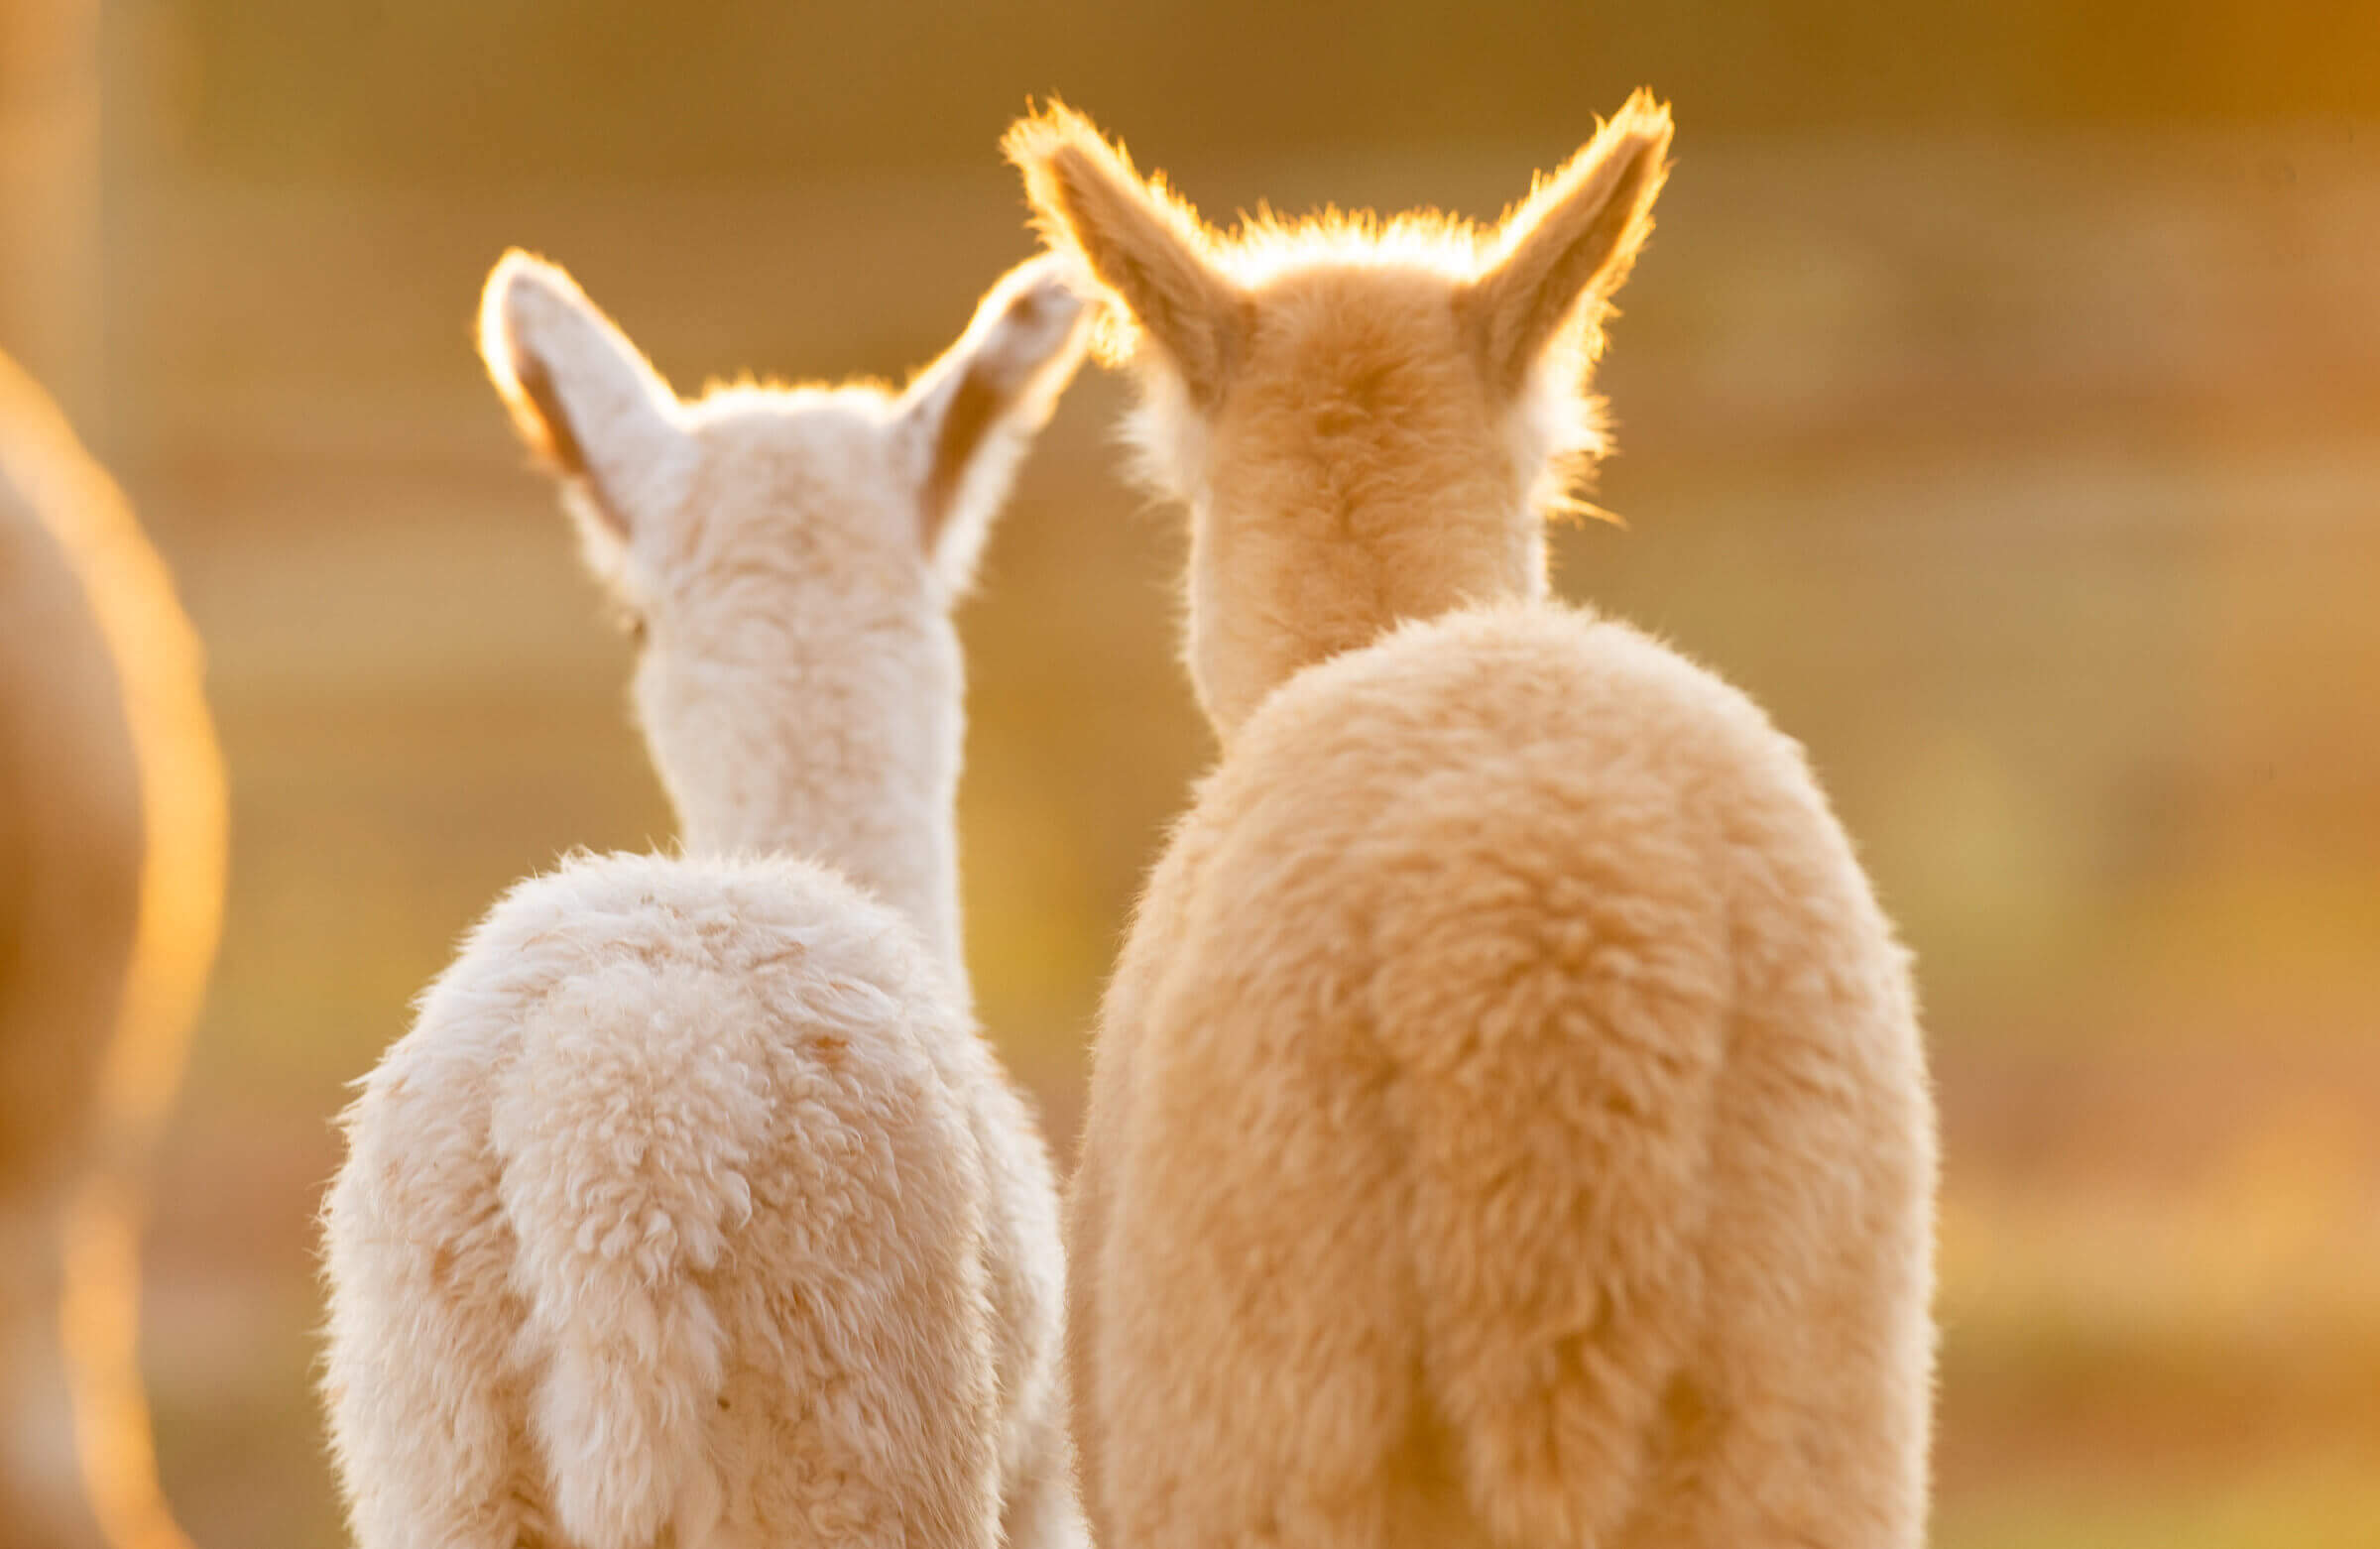 Two young Alpacas on the Sandwerf grounds.